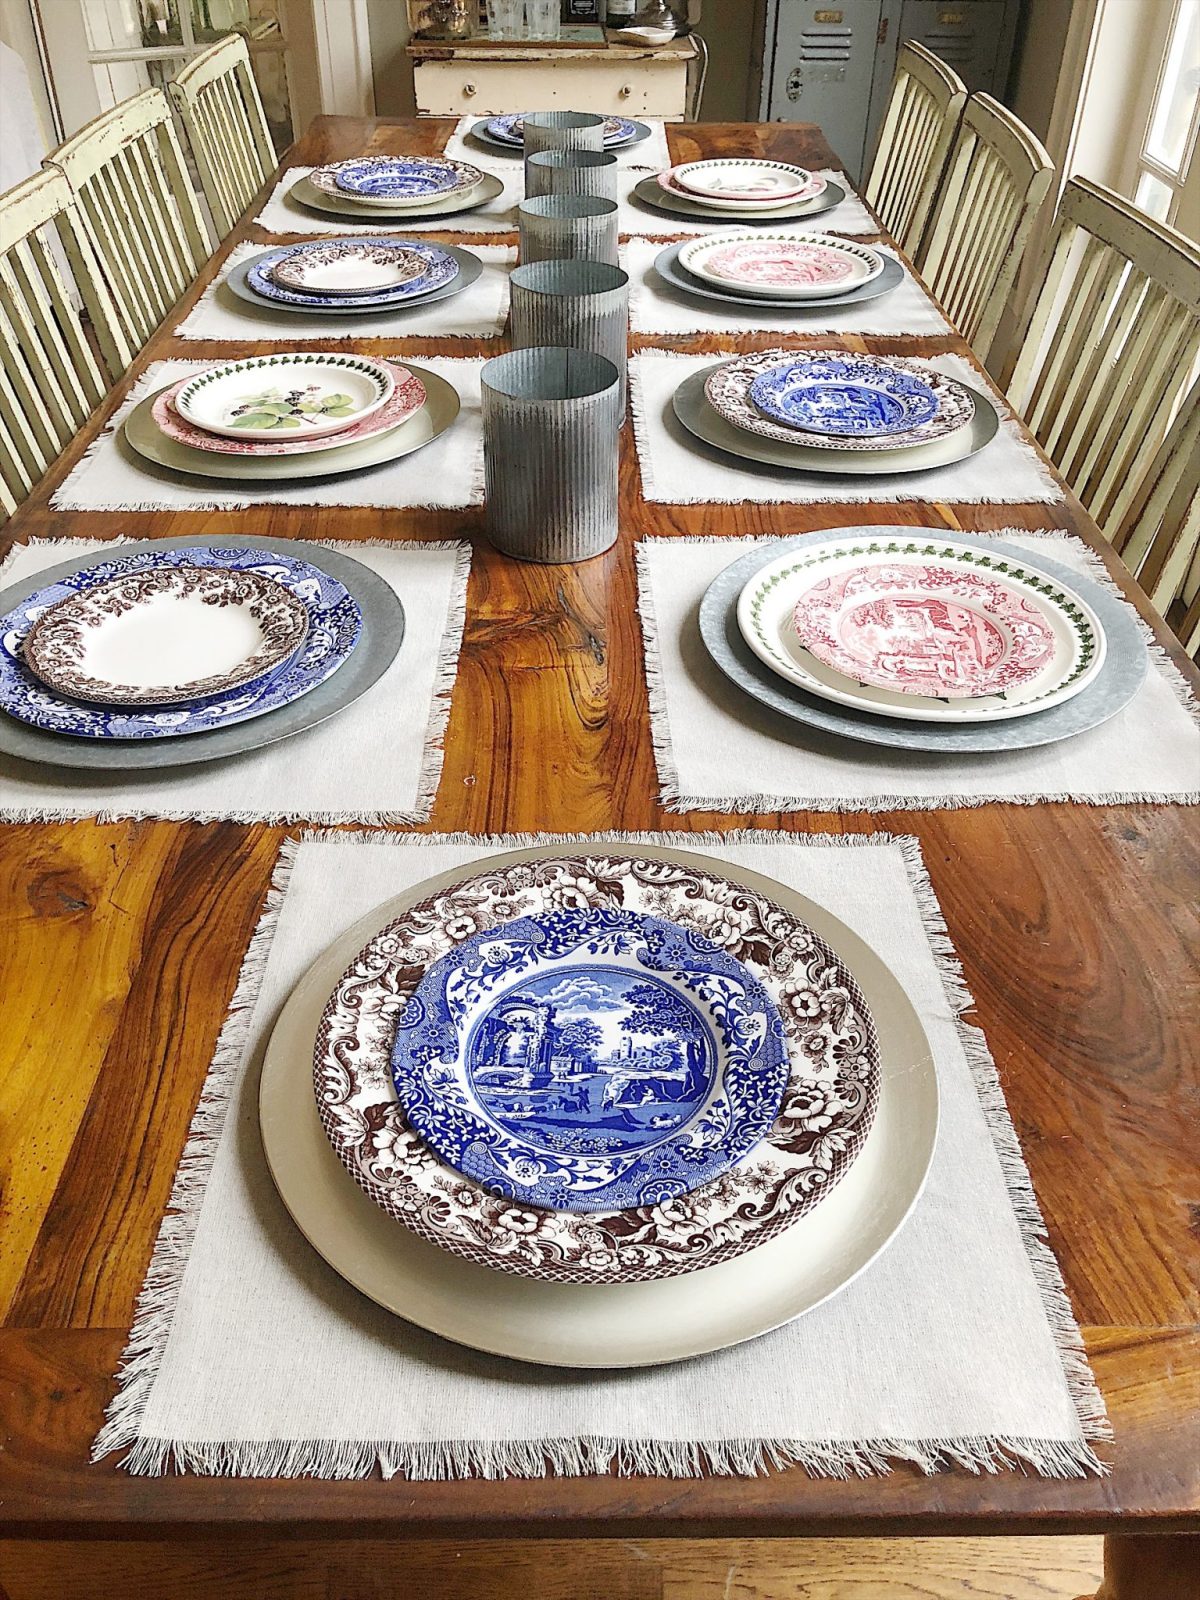 how to set a thanksgiving table with china